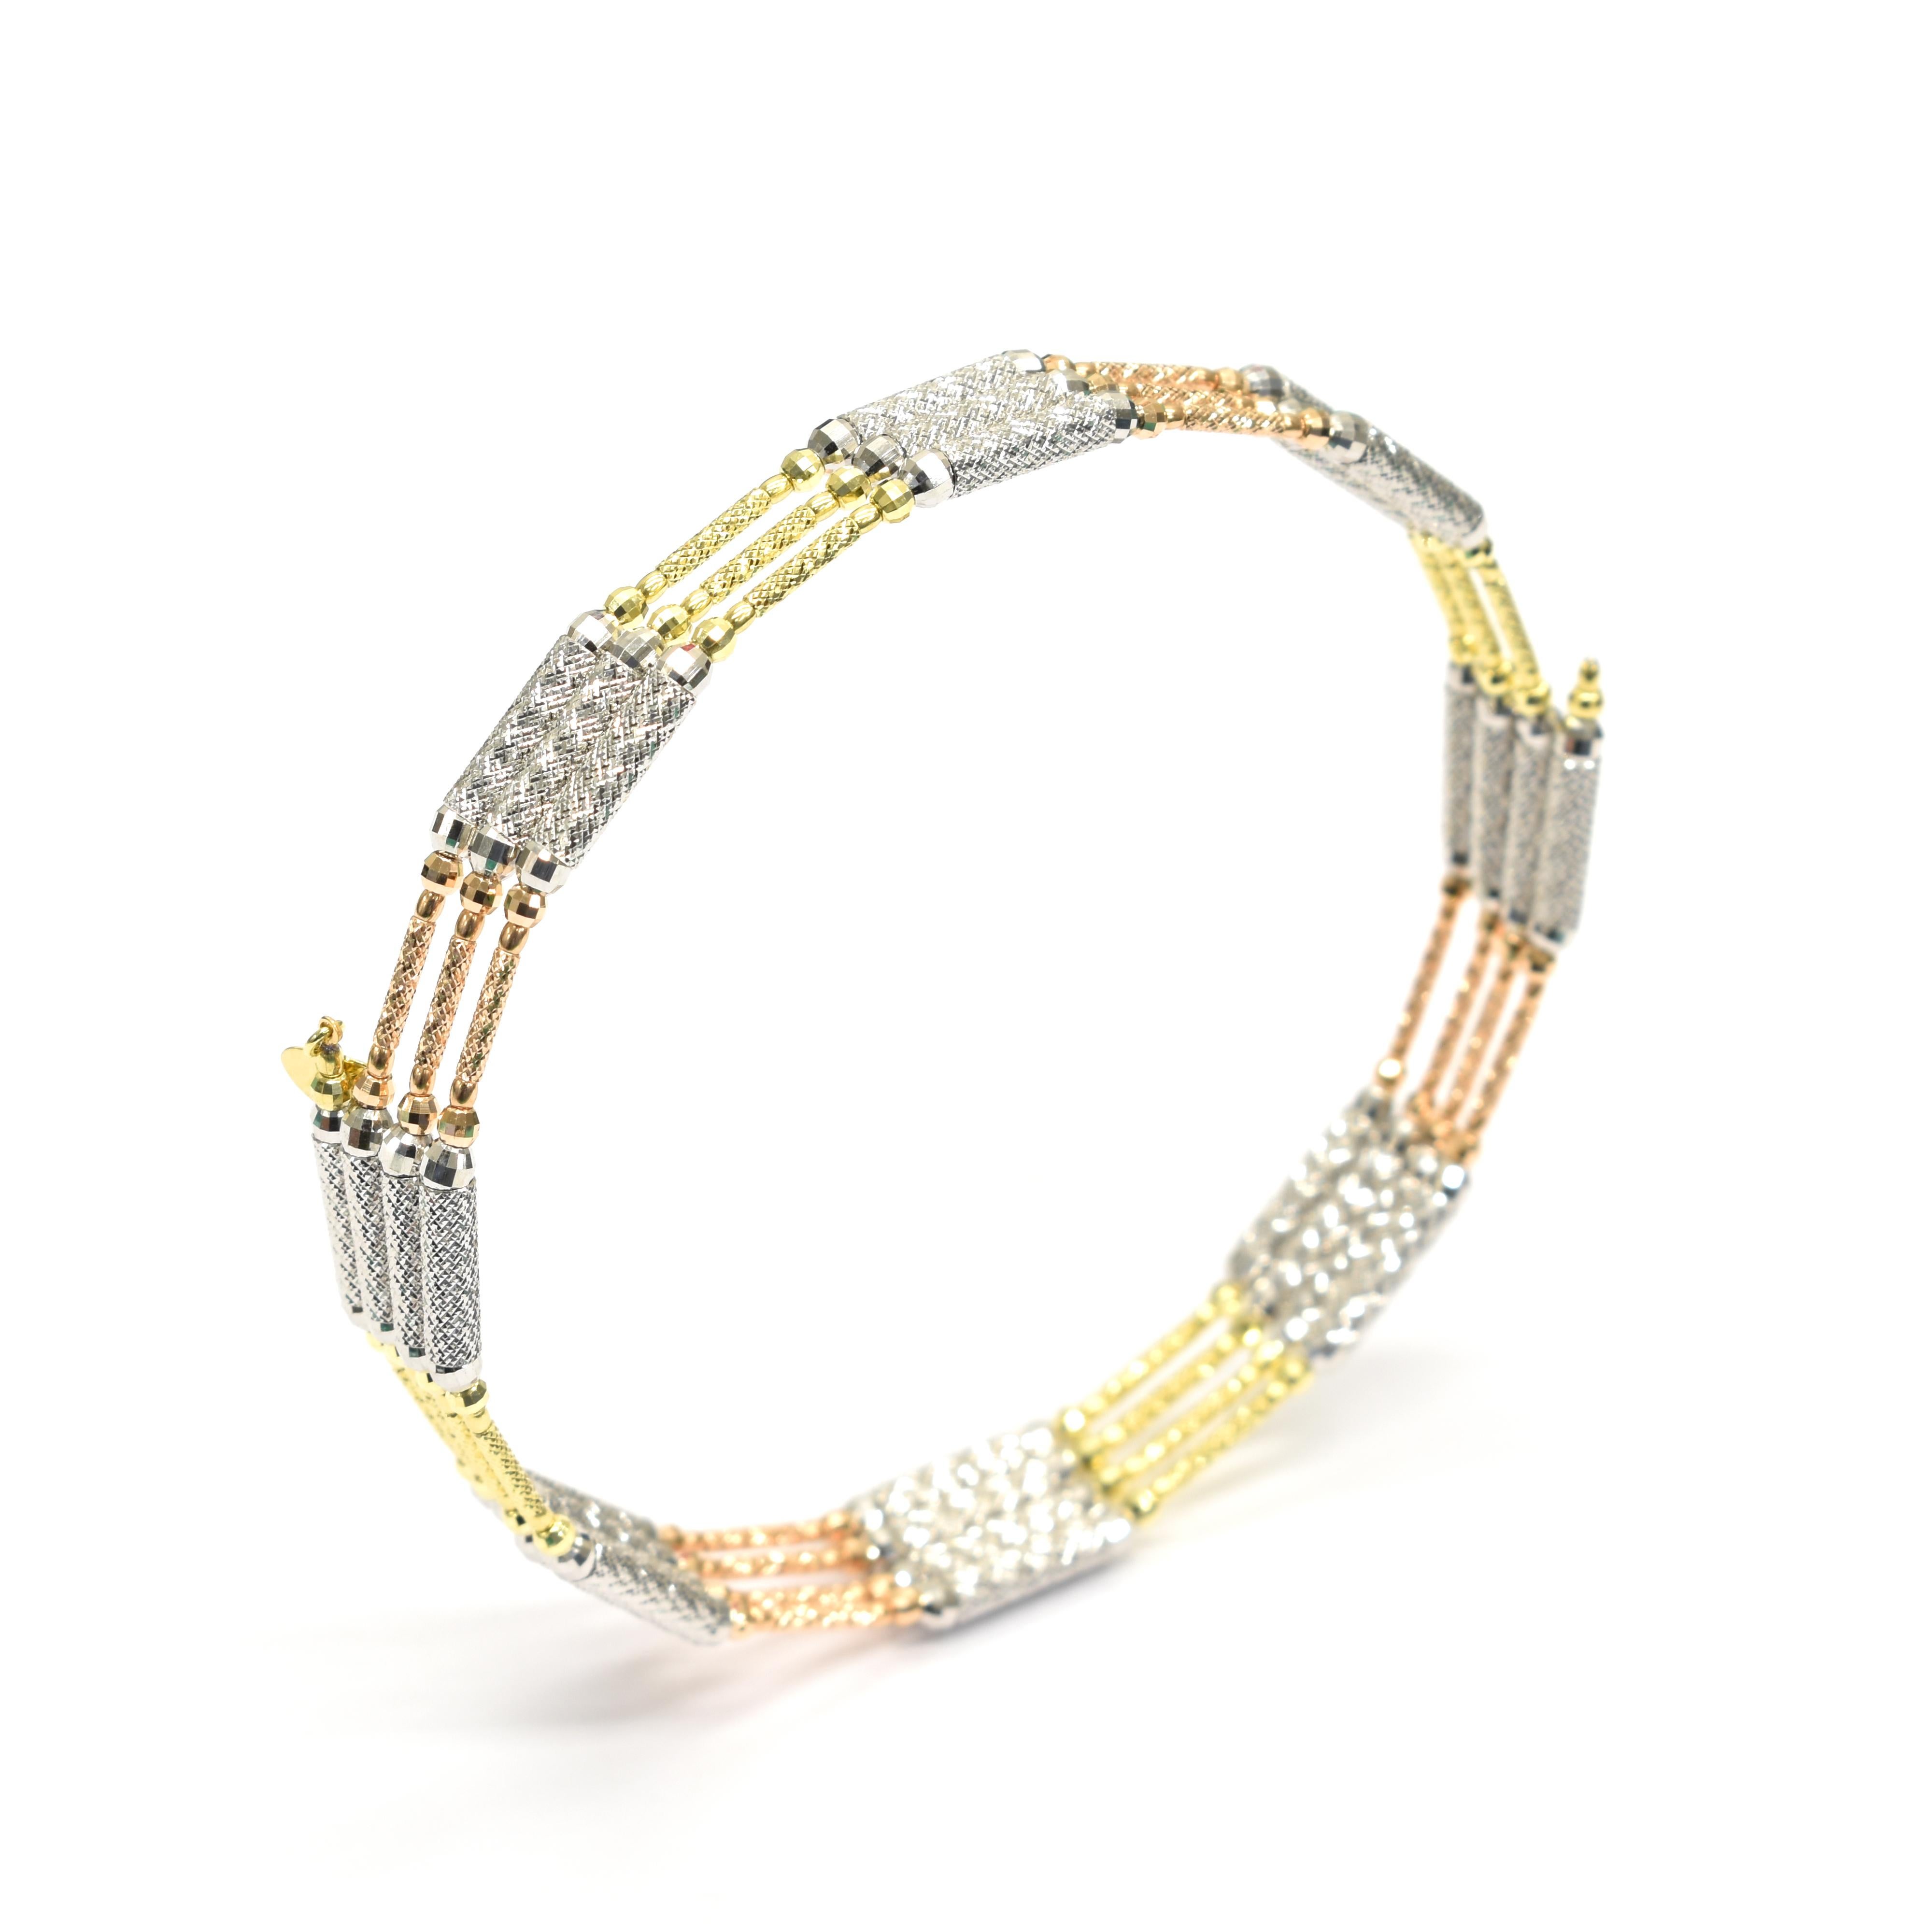 A stunning multi-use Bracelet-Necklace made in a combination of 18 Karat Yellow, White and Rose Gold with a magnetic mechanism. Approximately 6.5 grams of Gold. Can also be used as an anklet. Made in Japan. Contact us for more information!